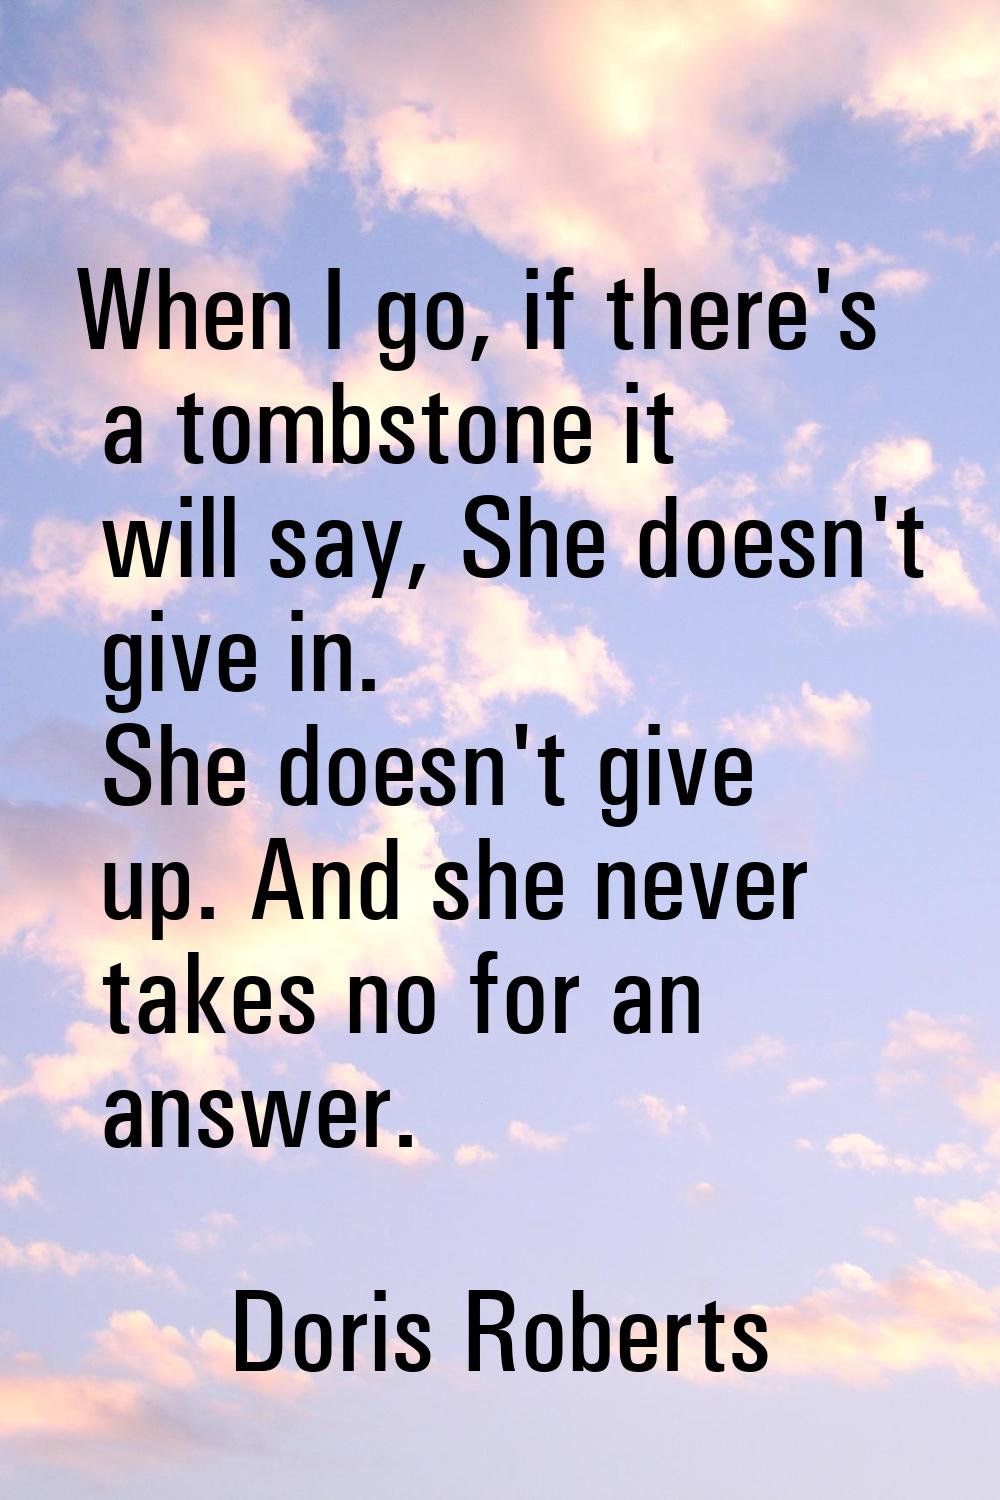 When I go, if there's a tombstone it will say, She doesn't give in. She doesn't give up. And she ne